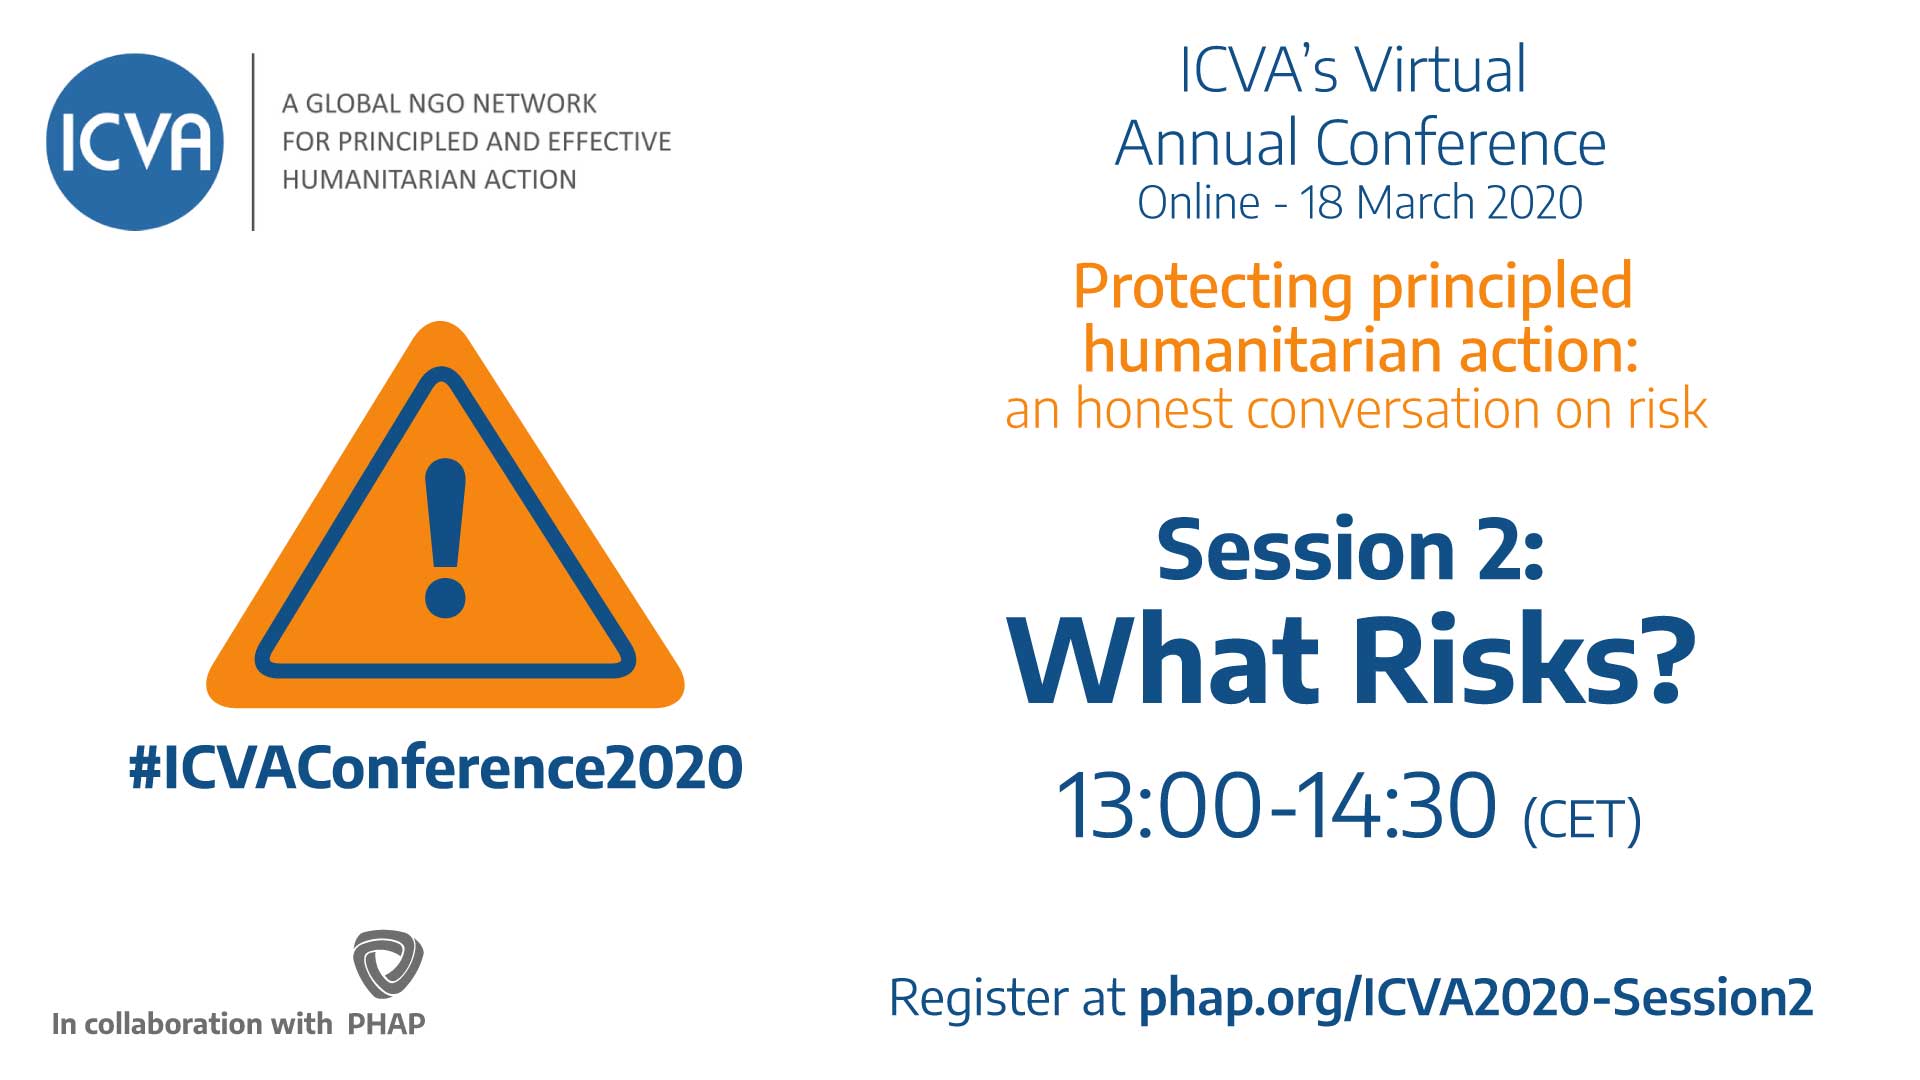 Banner for the ICVA Annual Conference 2020: Session 2